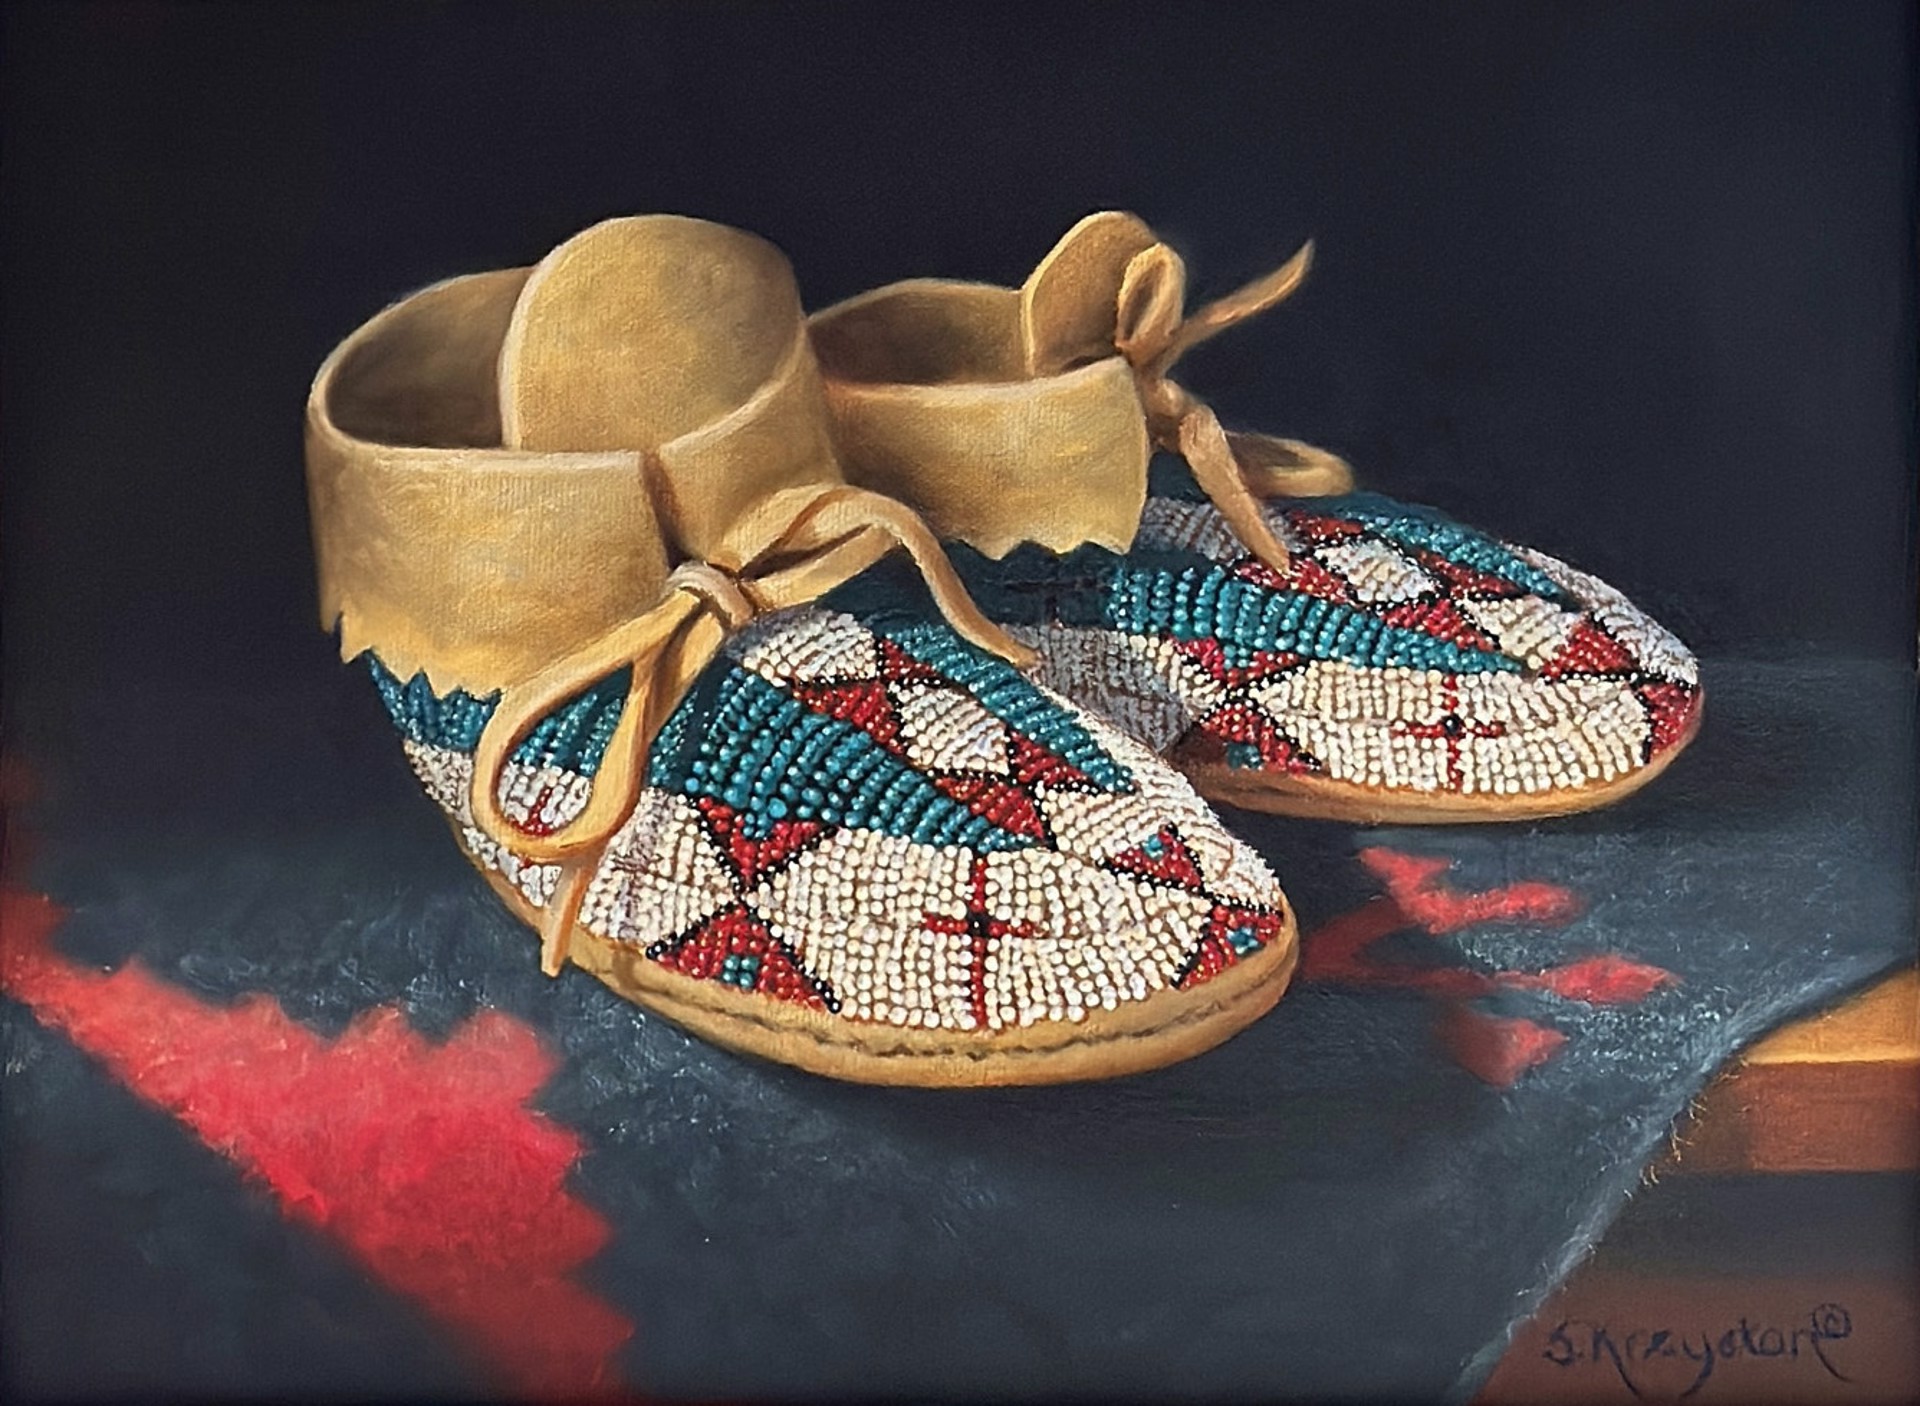 Respect for Tradition by Sue Krzyston